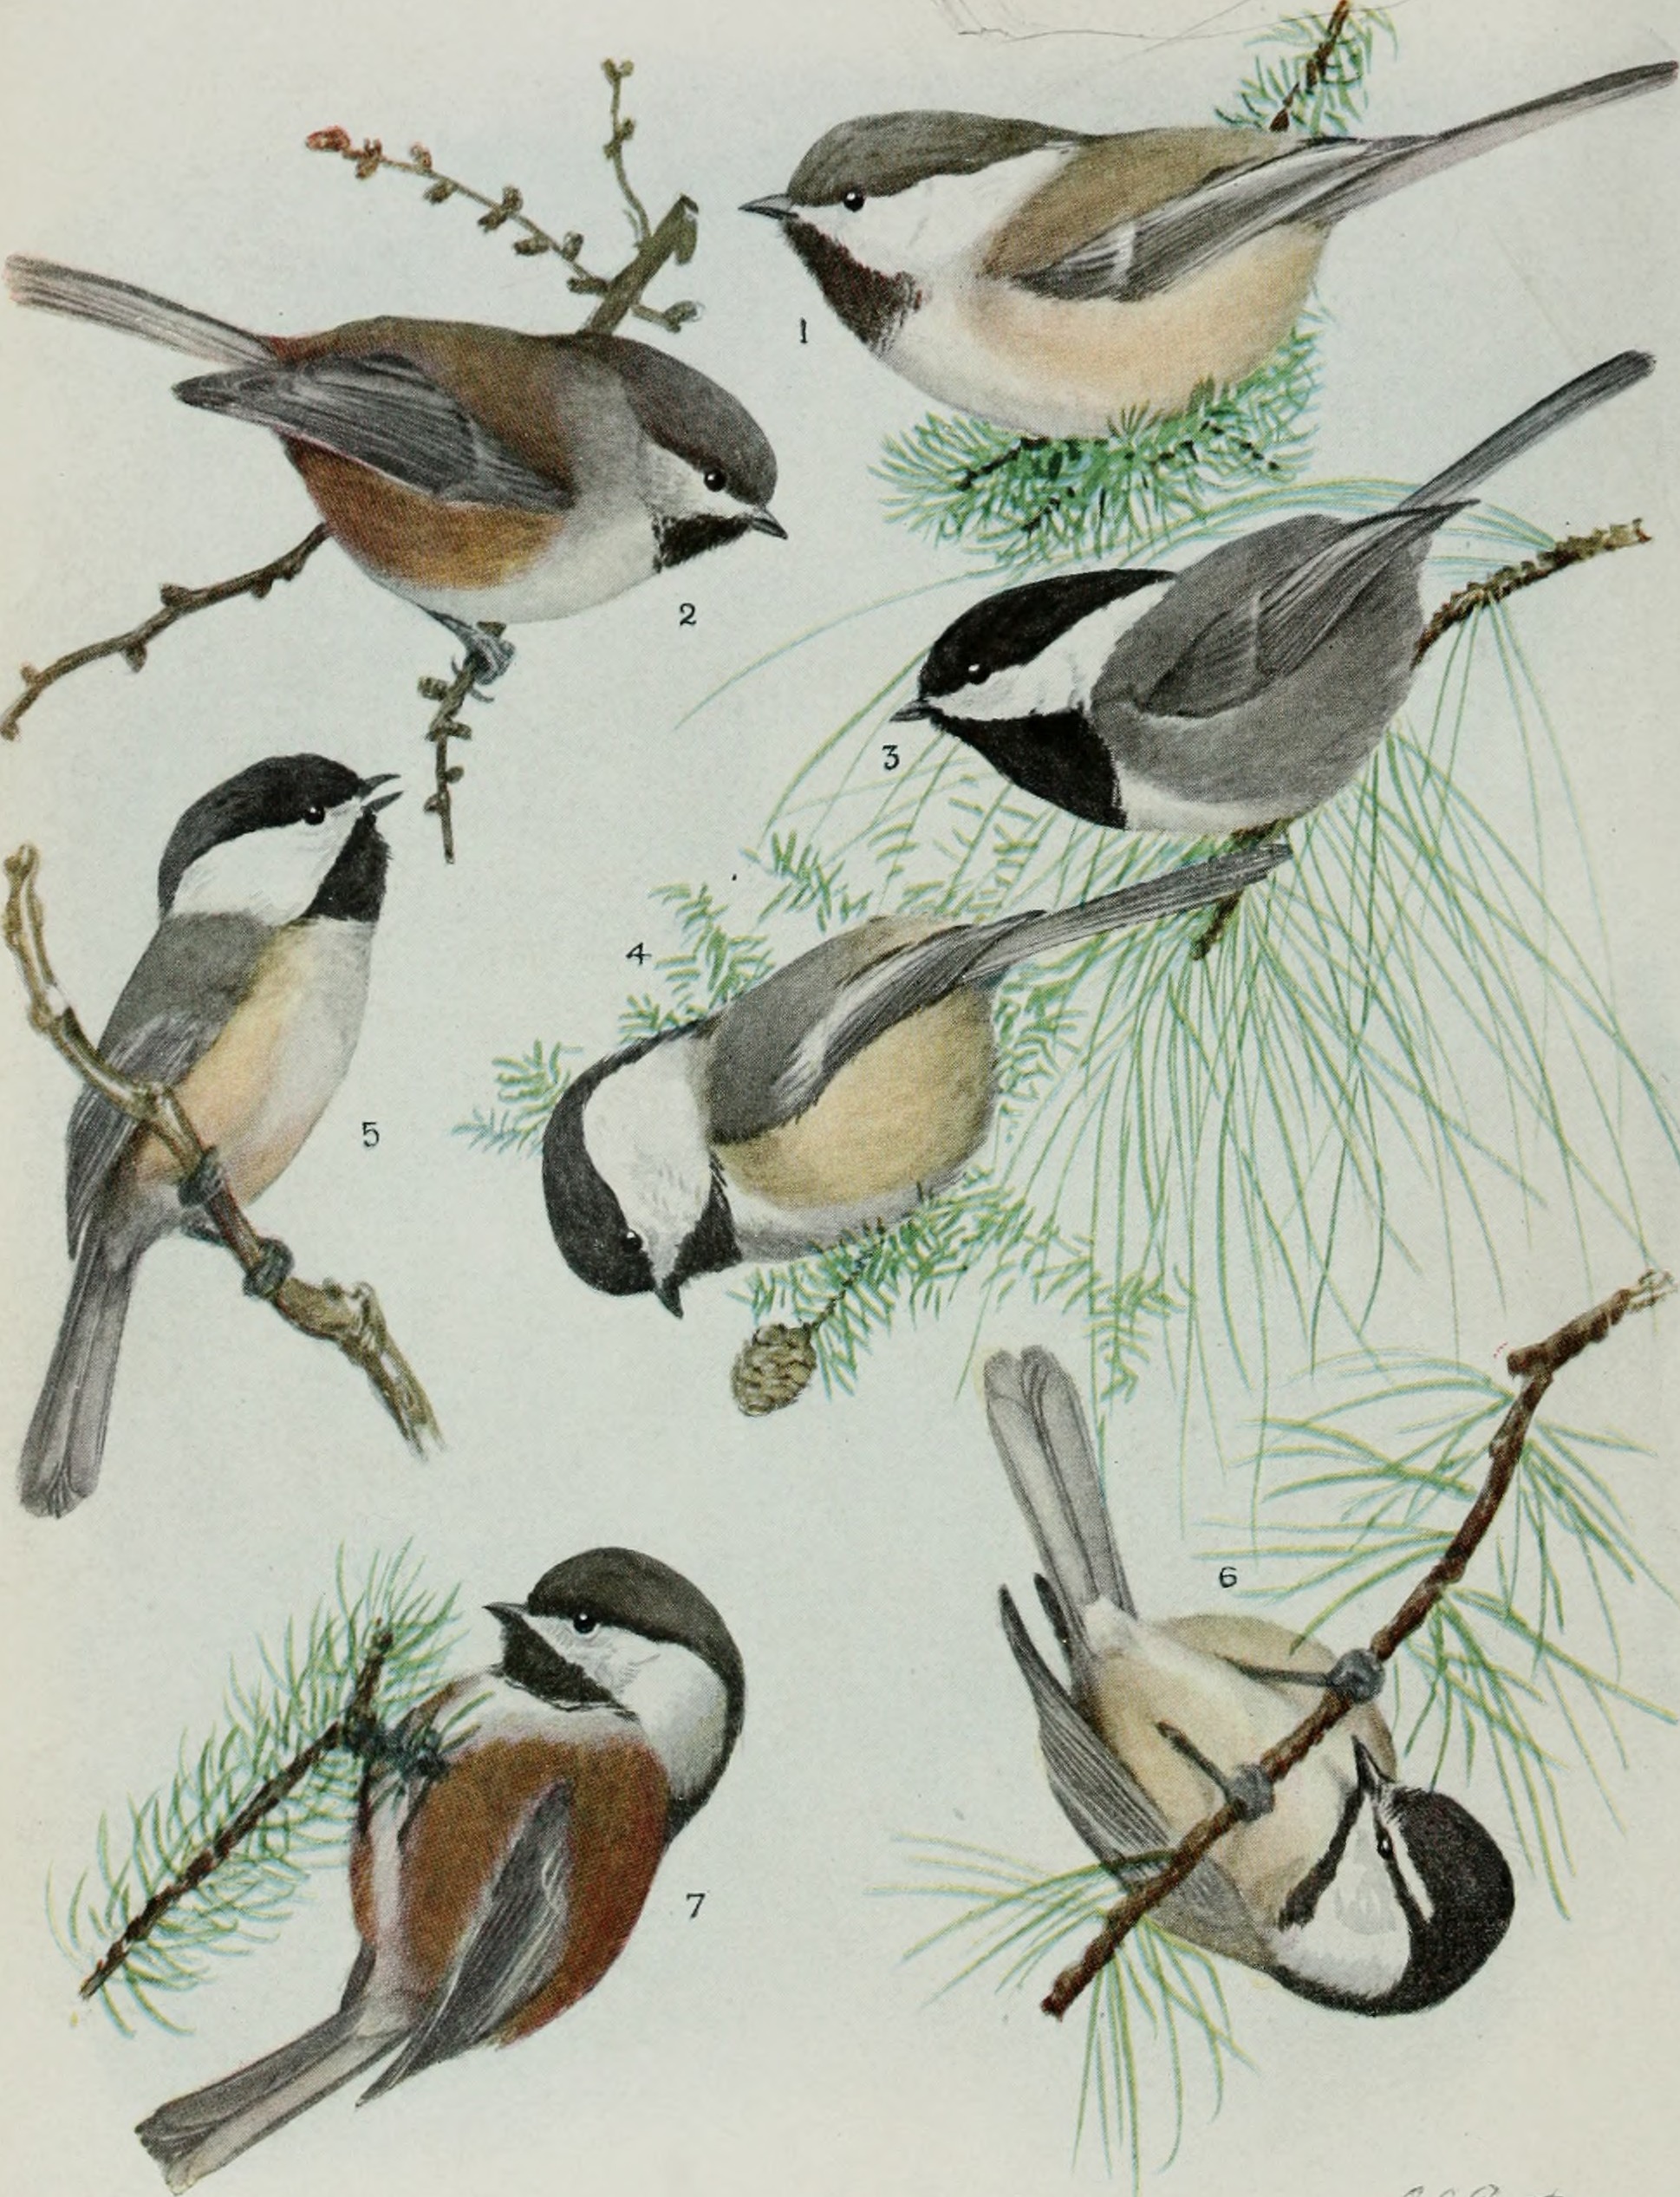 Image from page 17 of "Bird-lore" (1899)